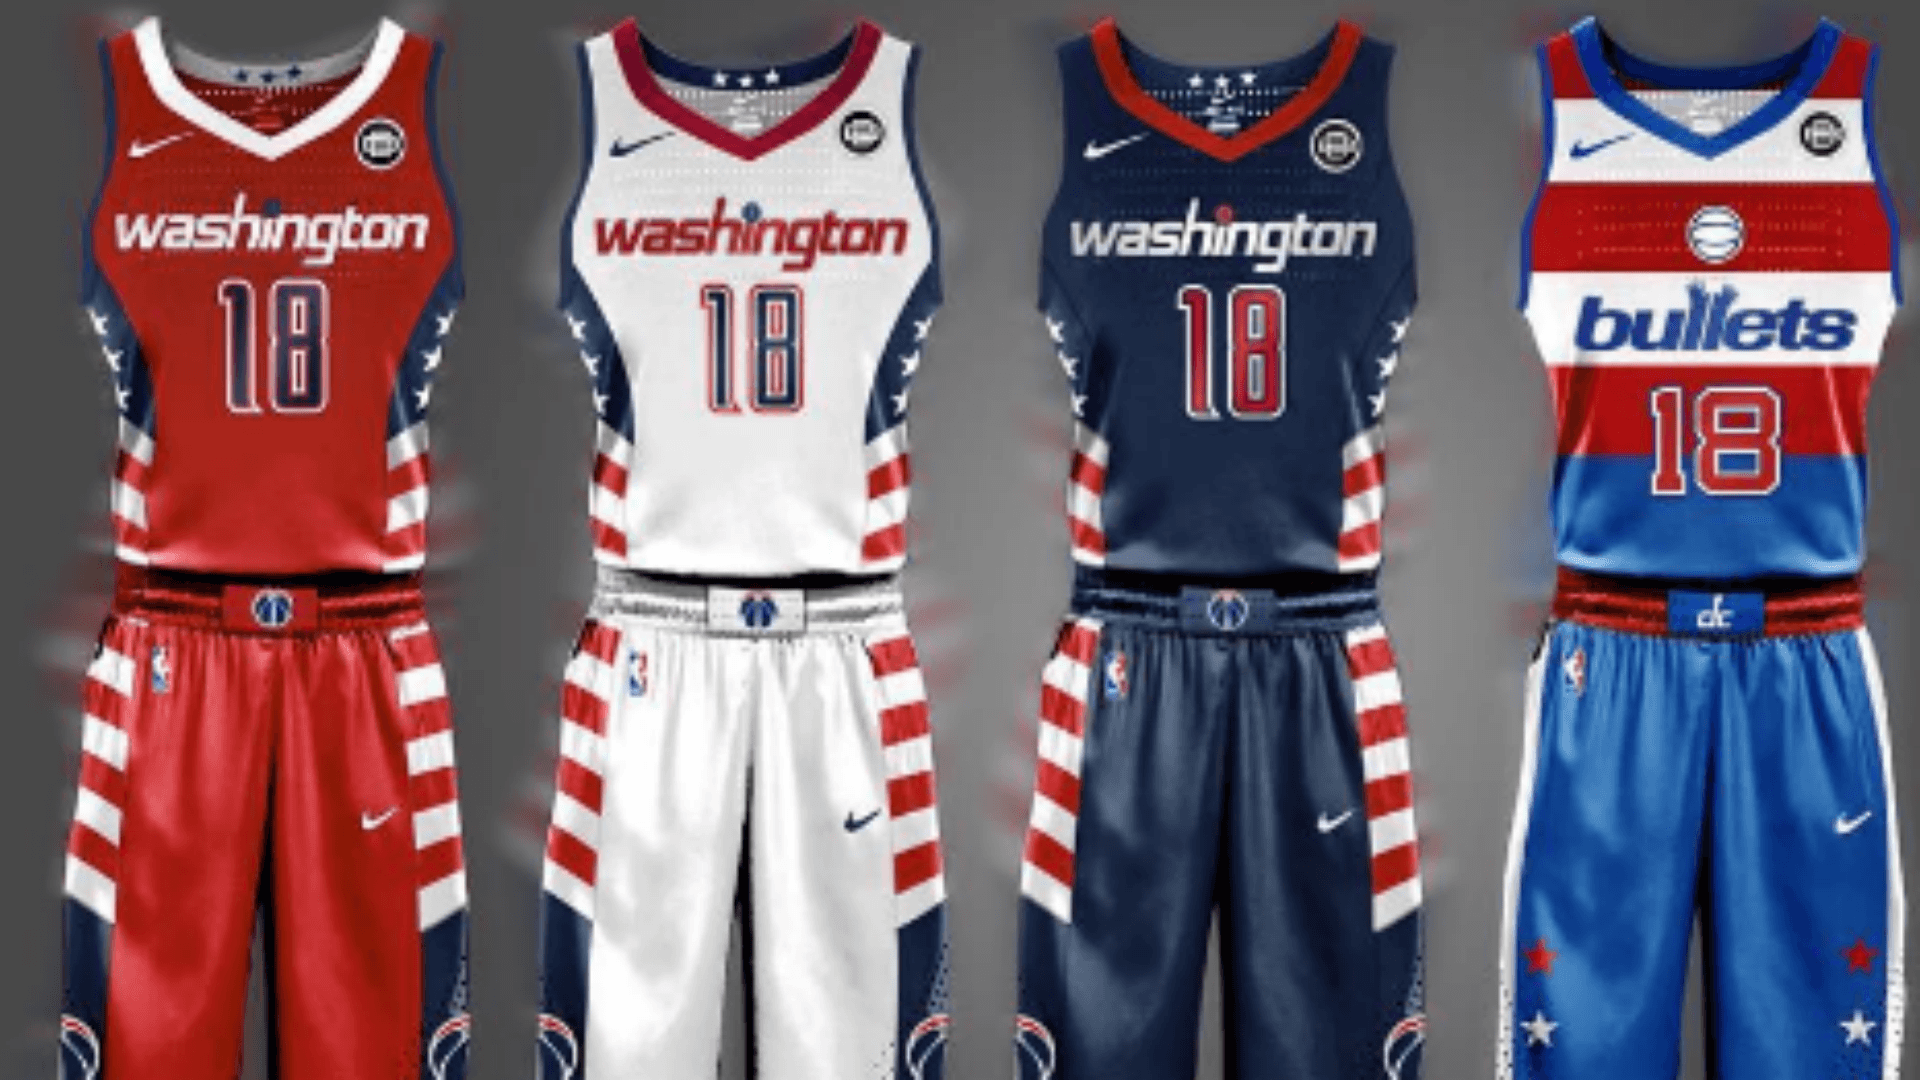 These Wizards concept uniforms are a thing of beauty. NBC Sports